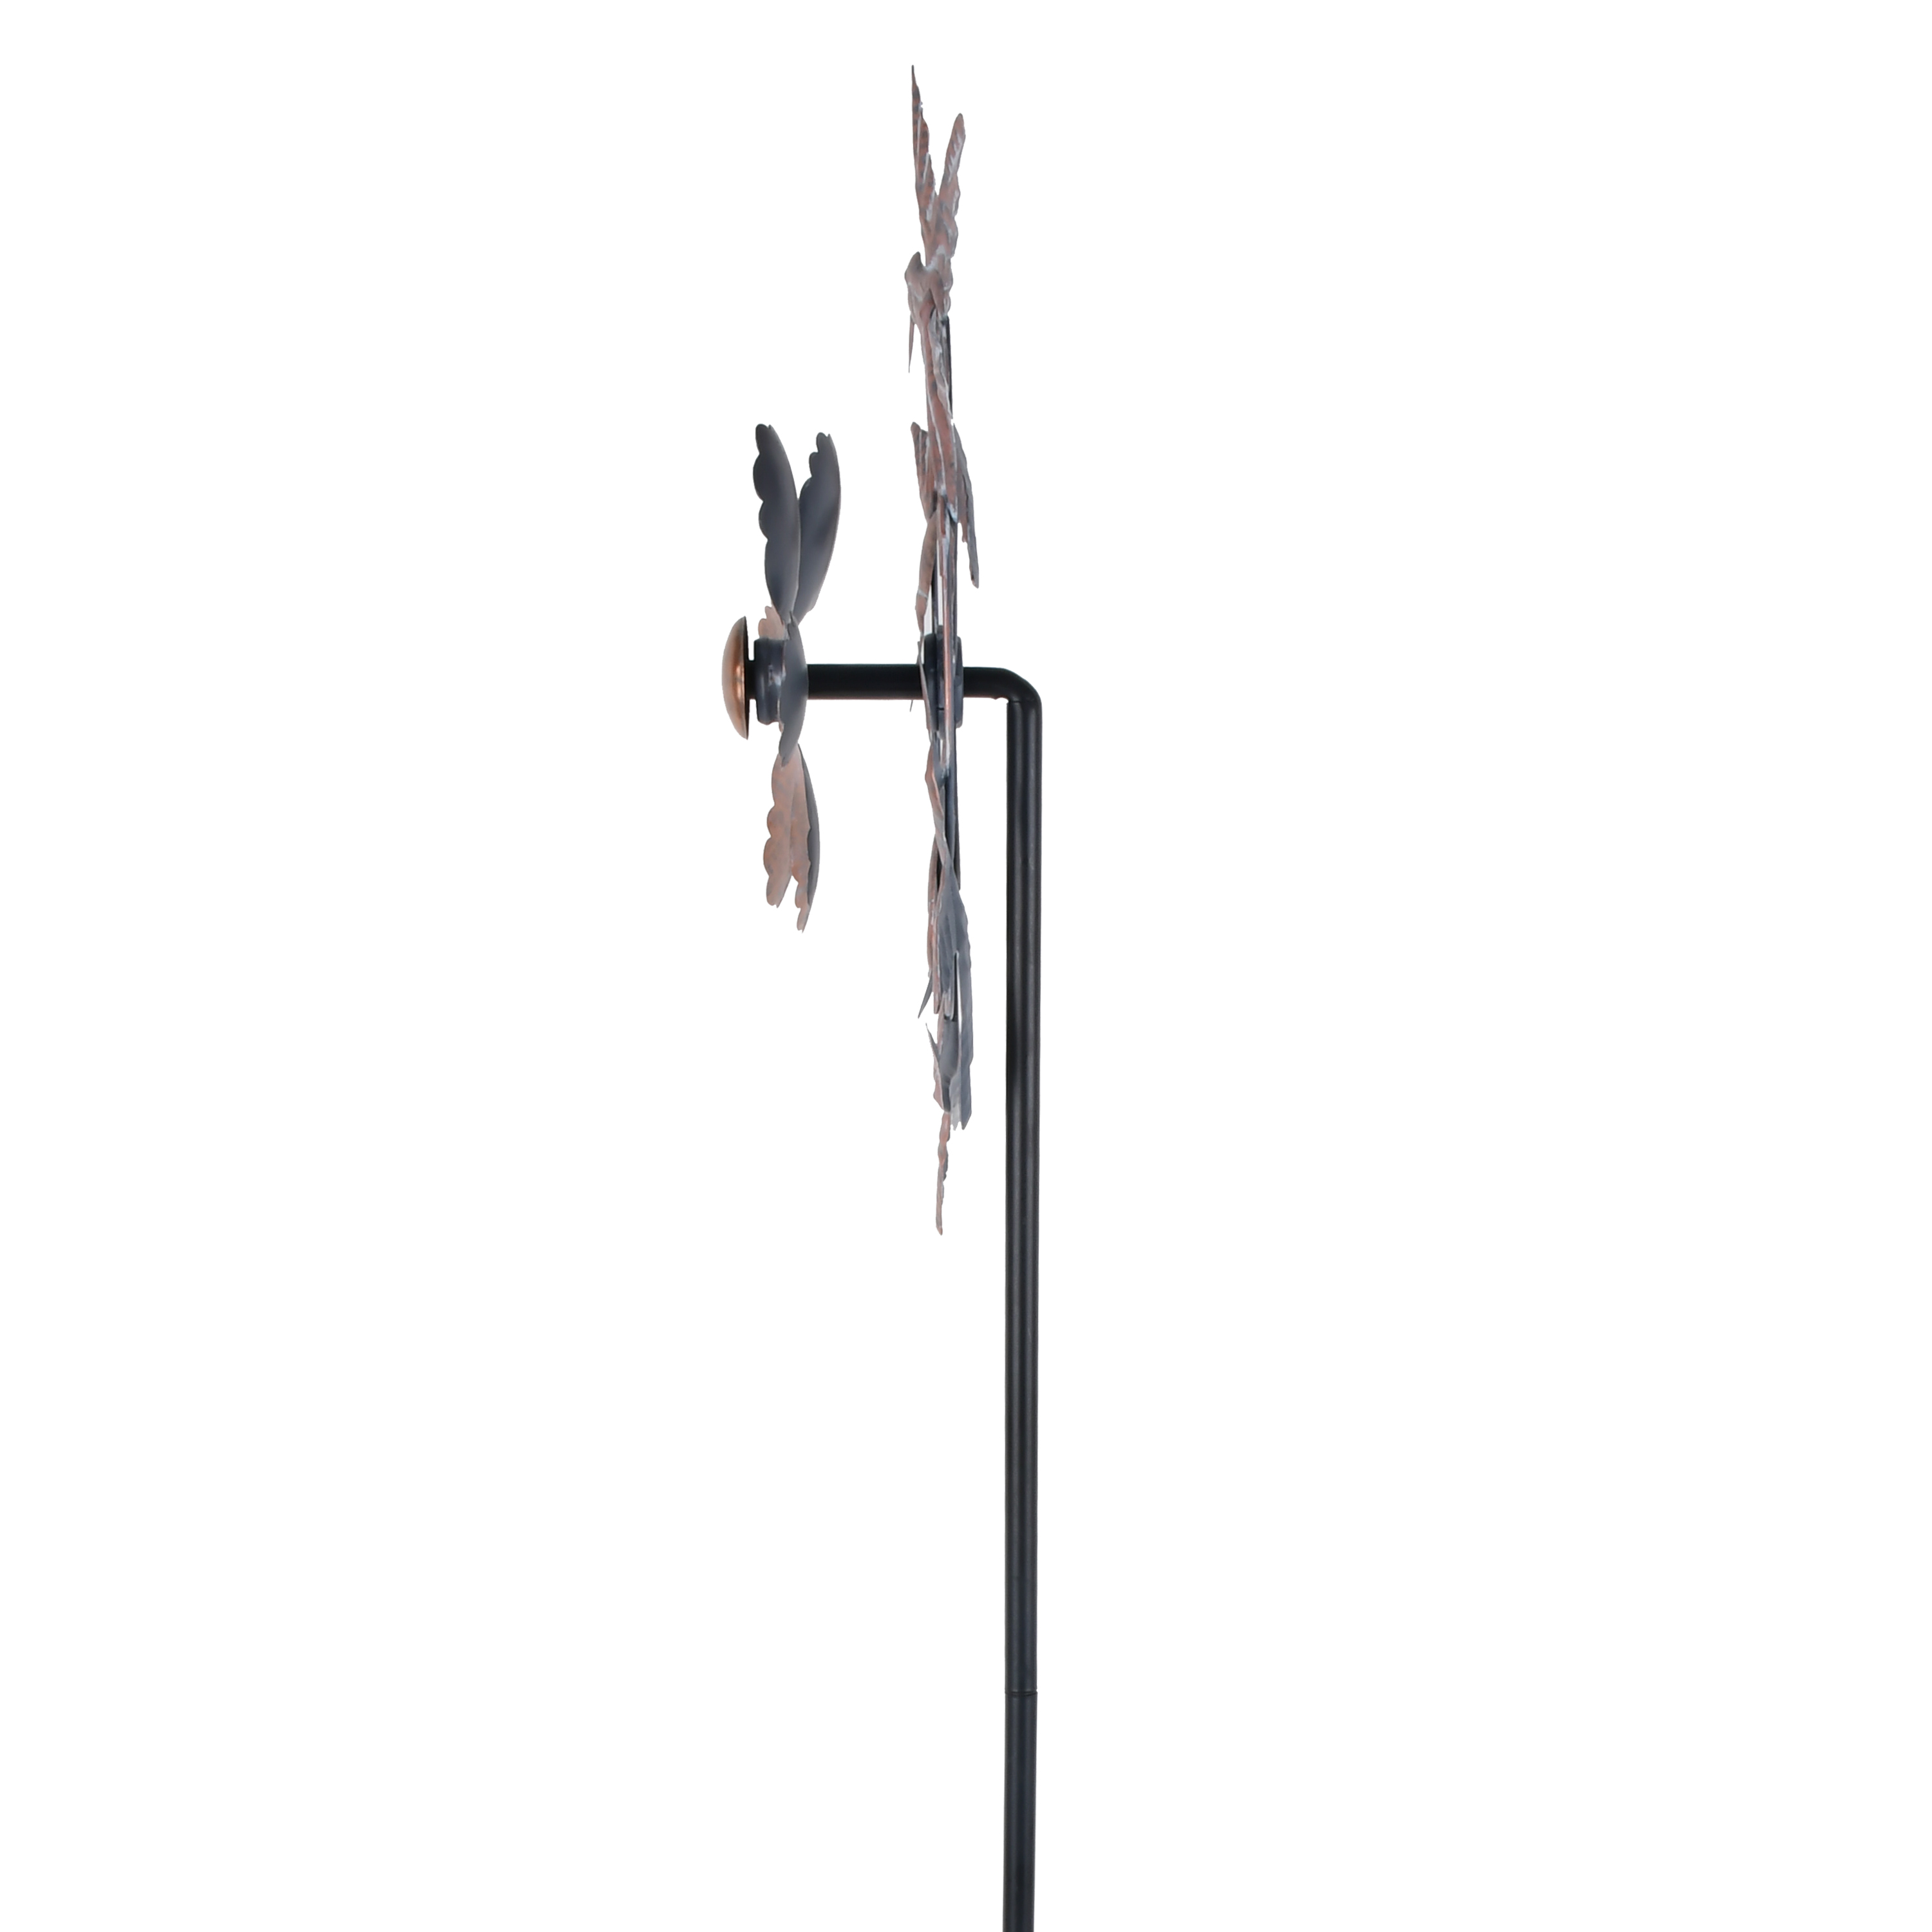 Mainstays 53" Copper Metal Wind Spinner - image 3 of 9